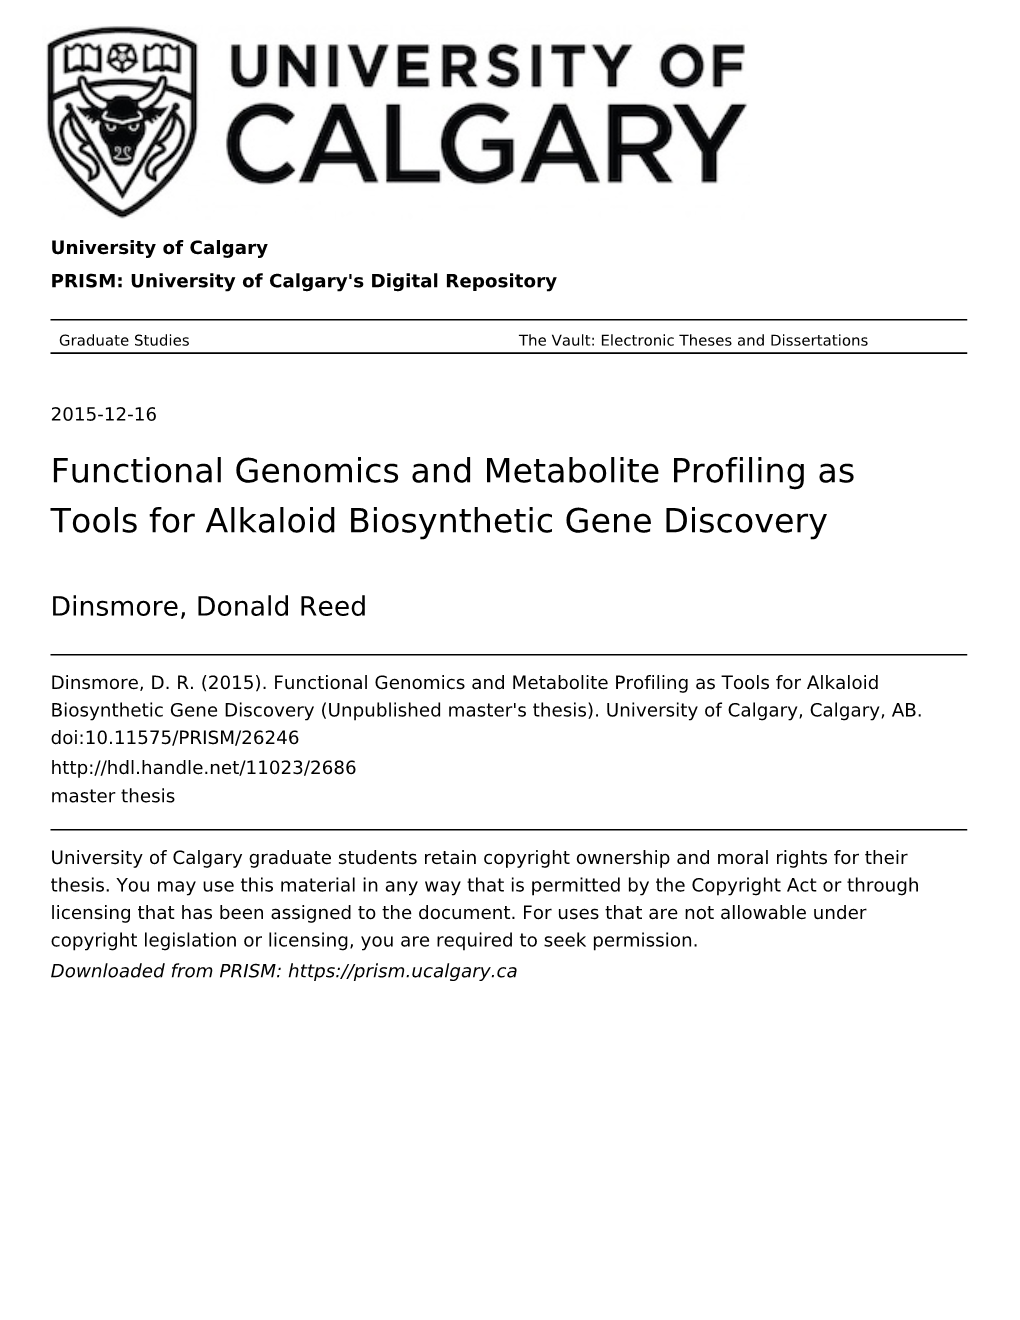 Functional Genomics and Metabolite Profiling As Tools for Alkaloid Biosynthetic Gene Discovery